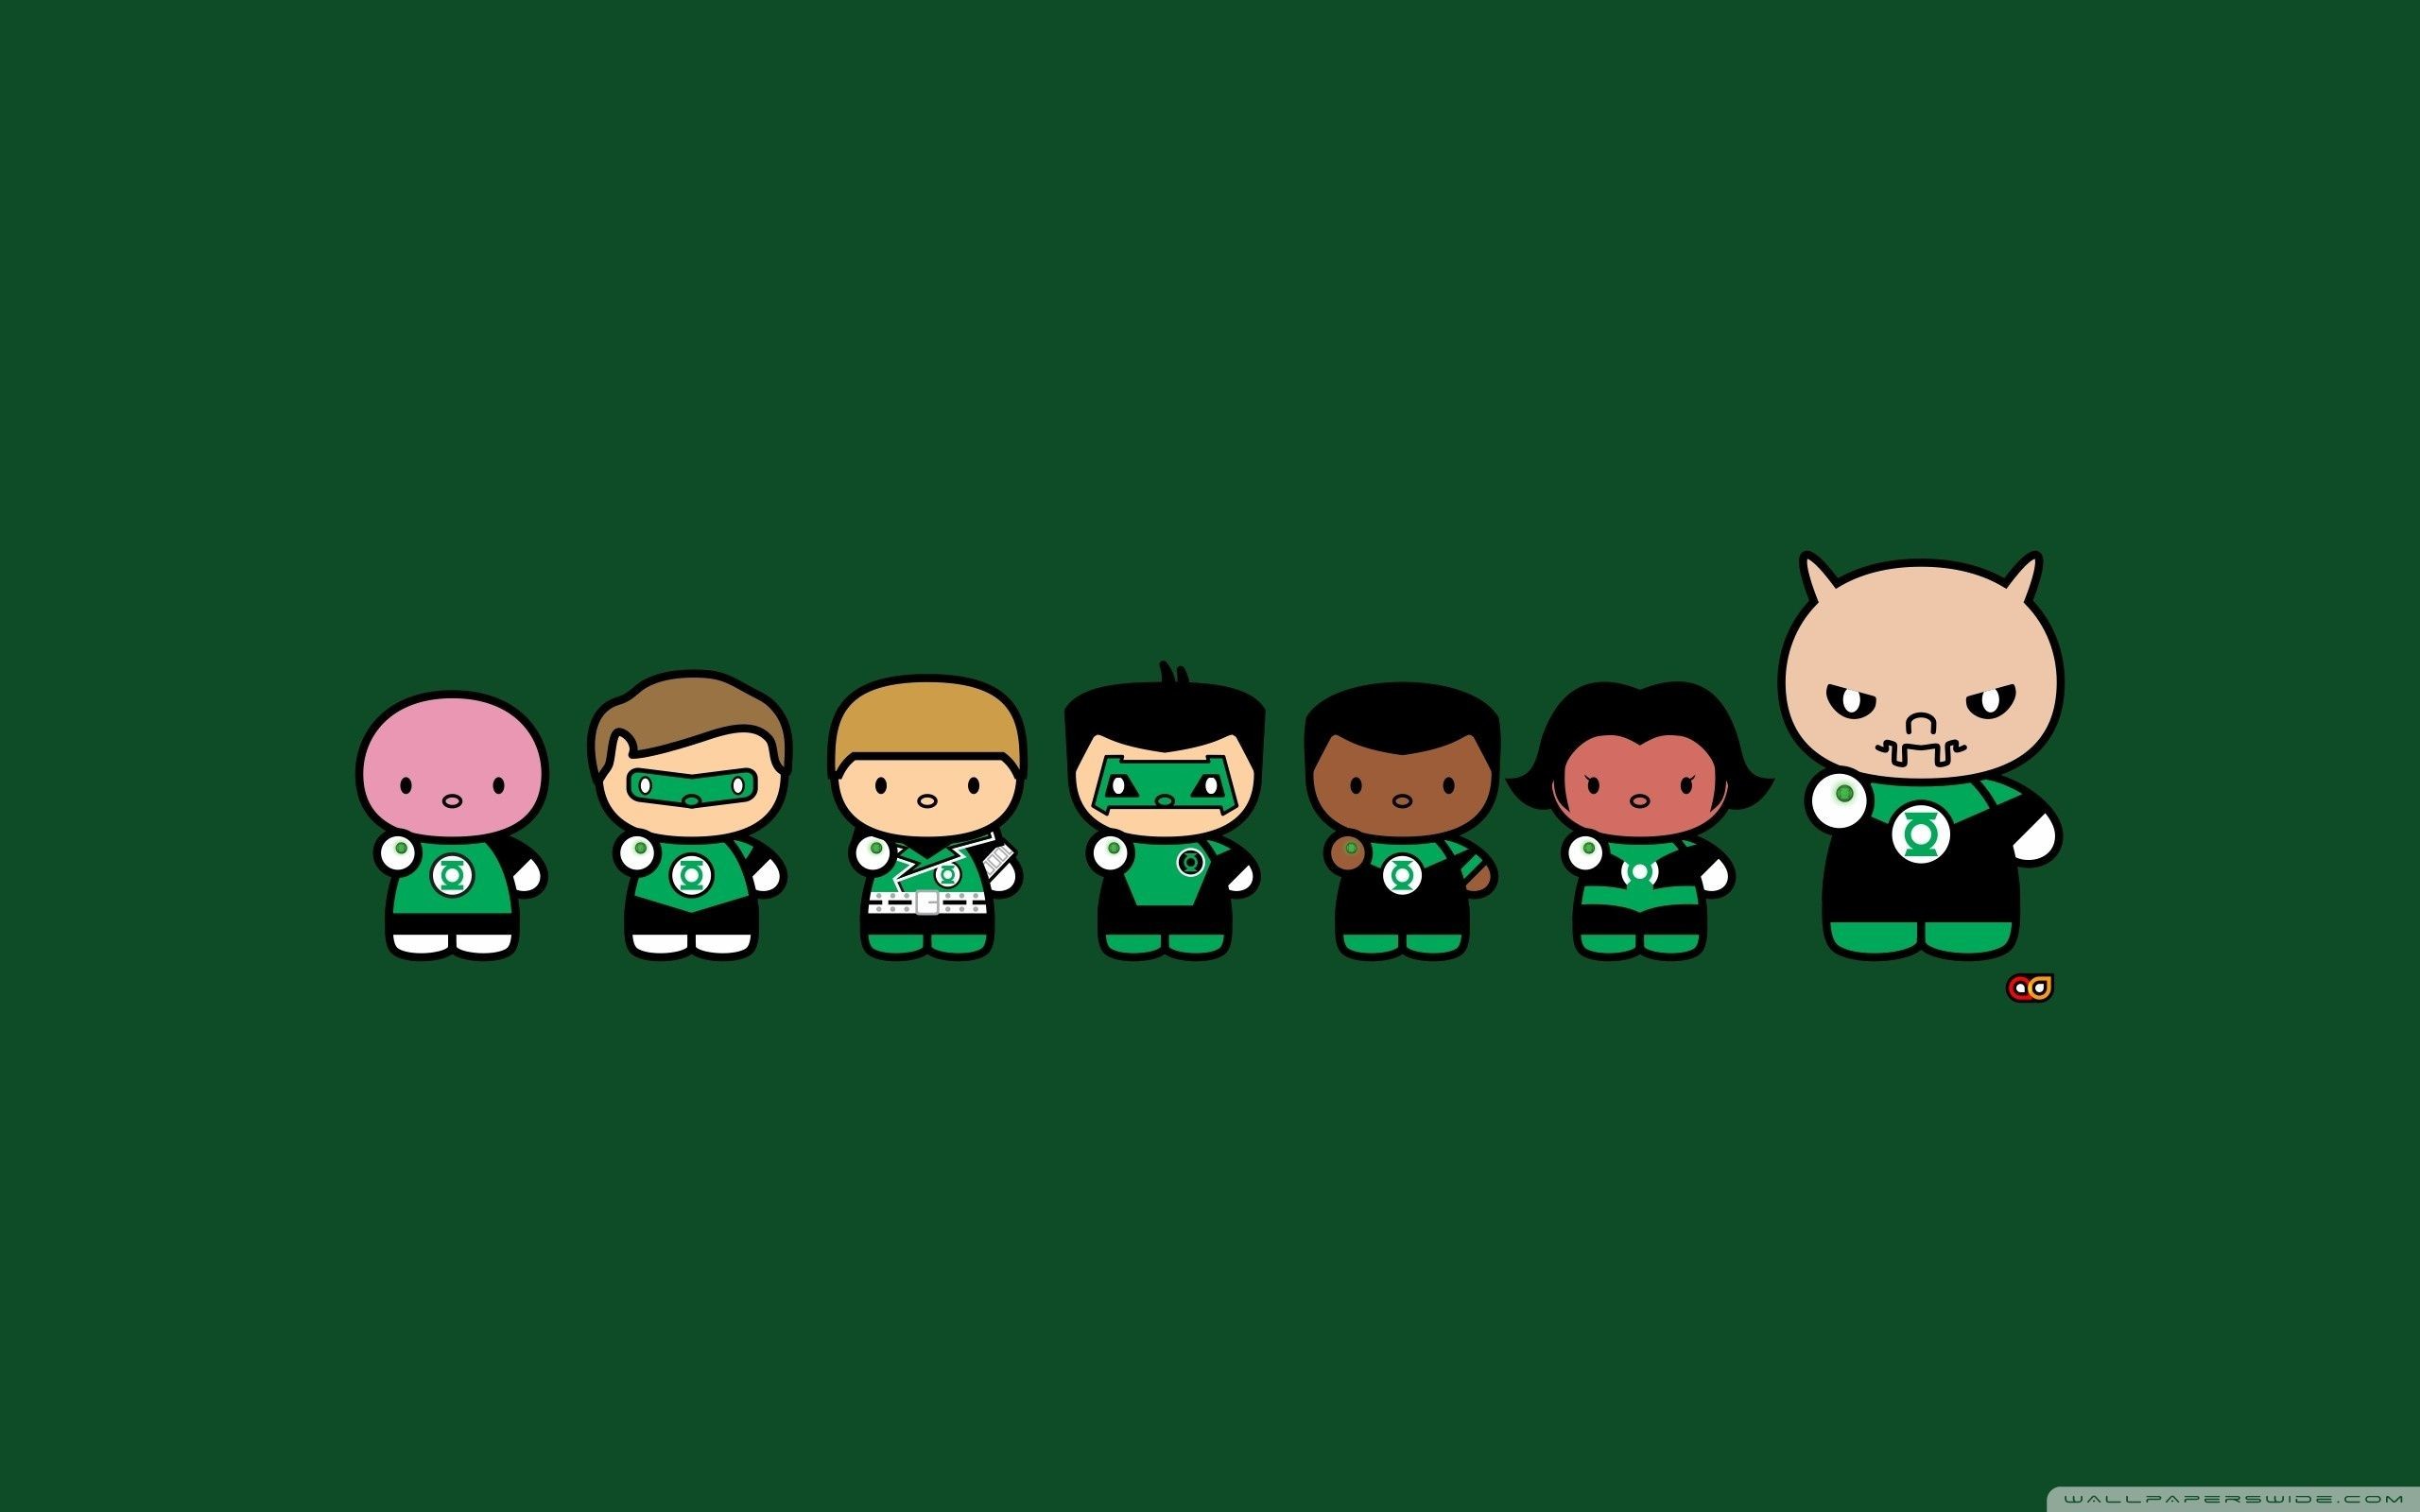 2560x1600 ... Green Lantern Corps Hd Wide Wallpaper For. Download